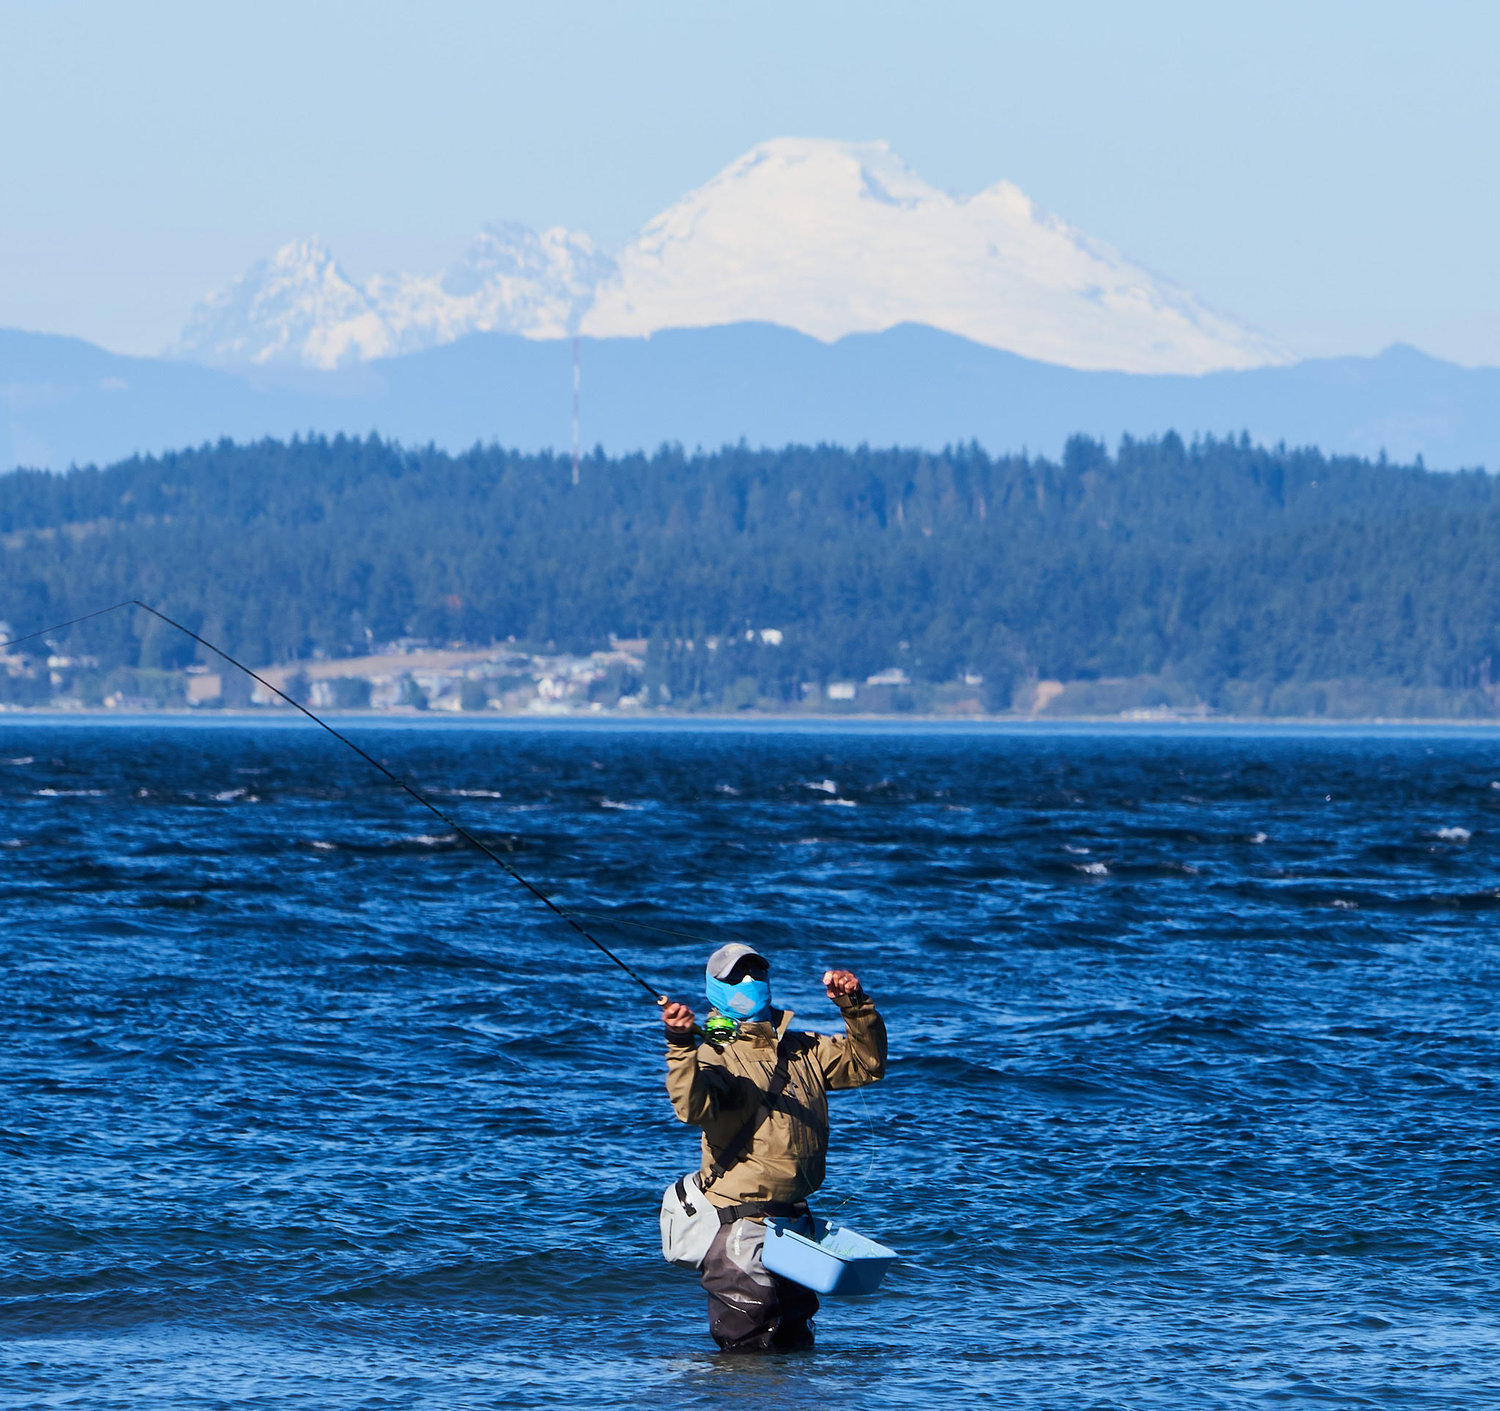 A fisherman in Hansville, Wash., with the Cascades in the distance, with the Mount Baker on the horizon.